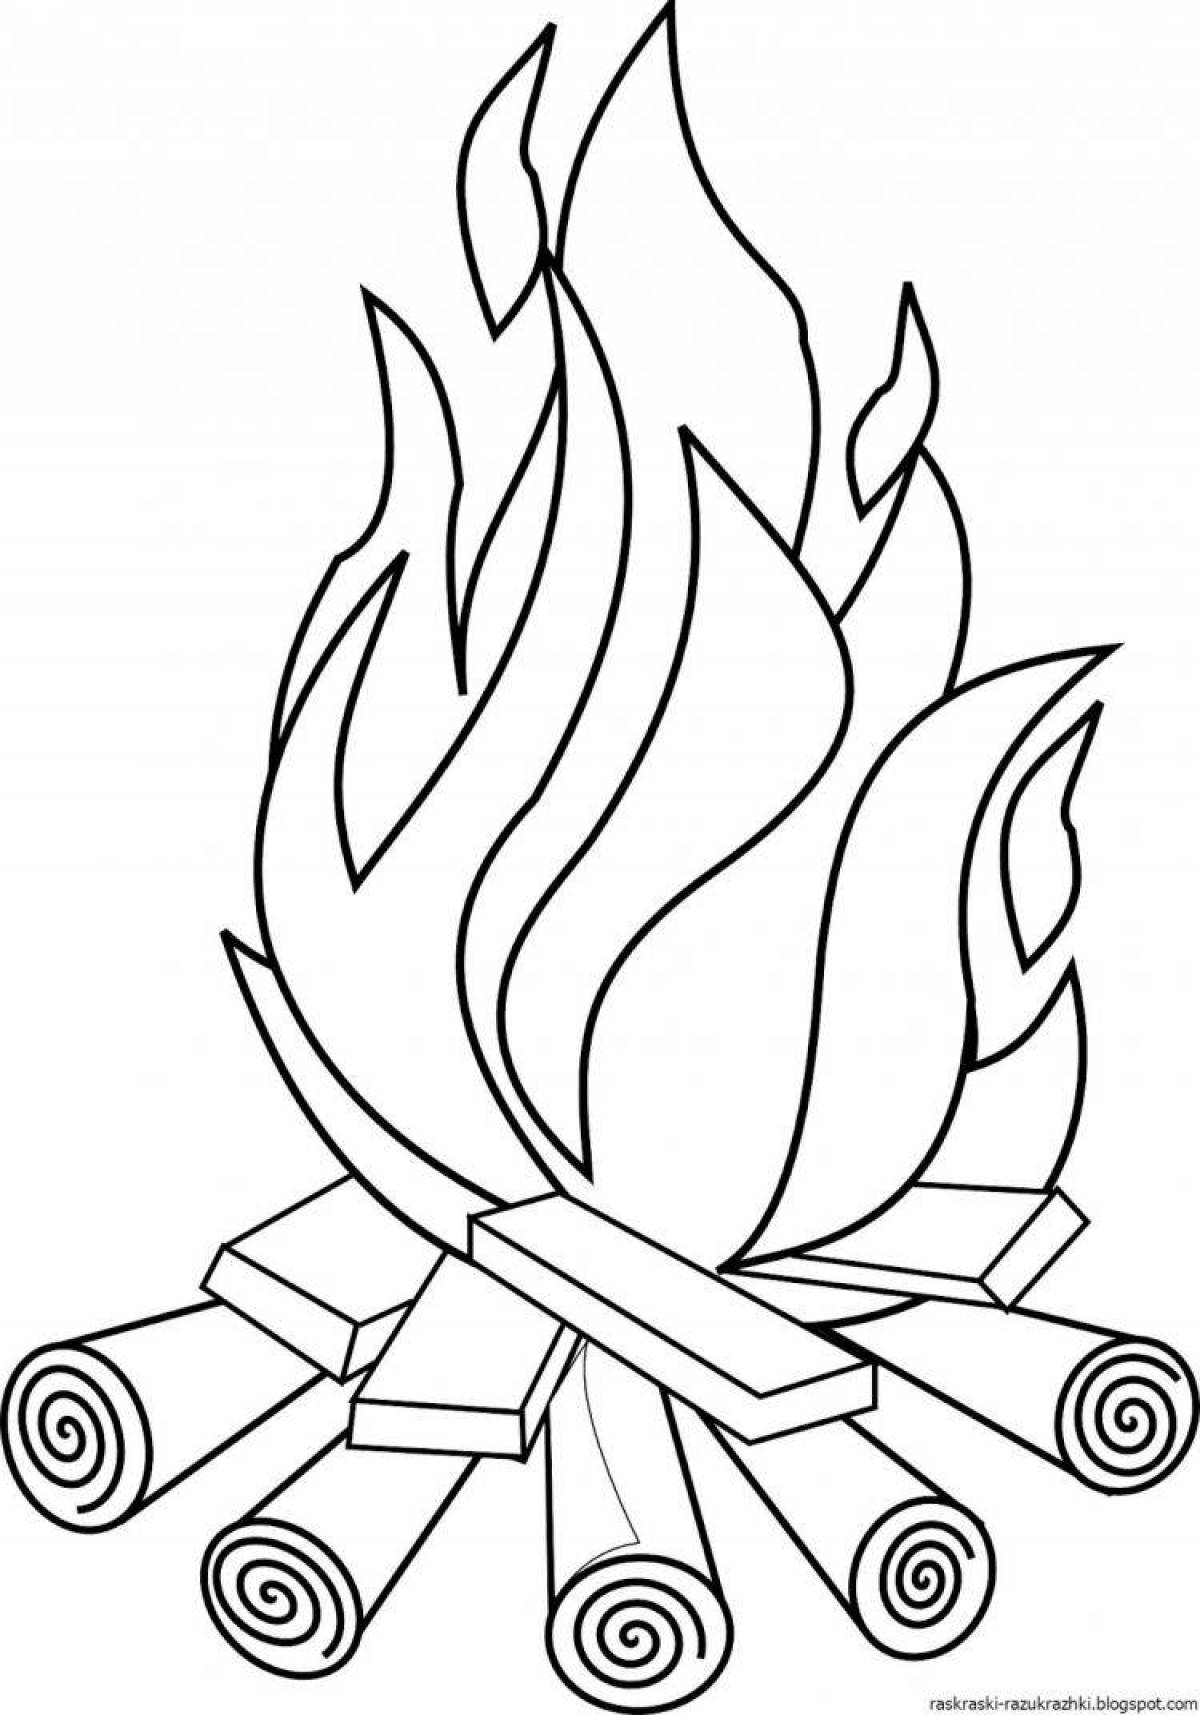 Coloring page with blazing flames for kids